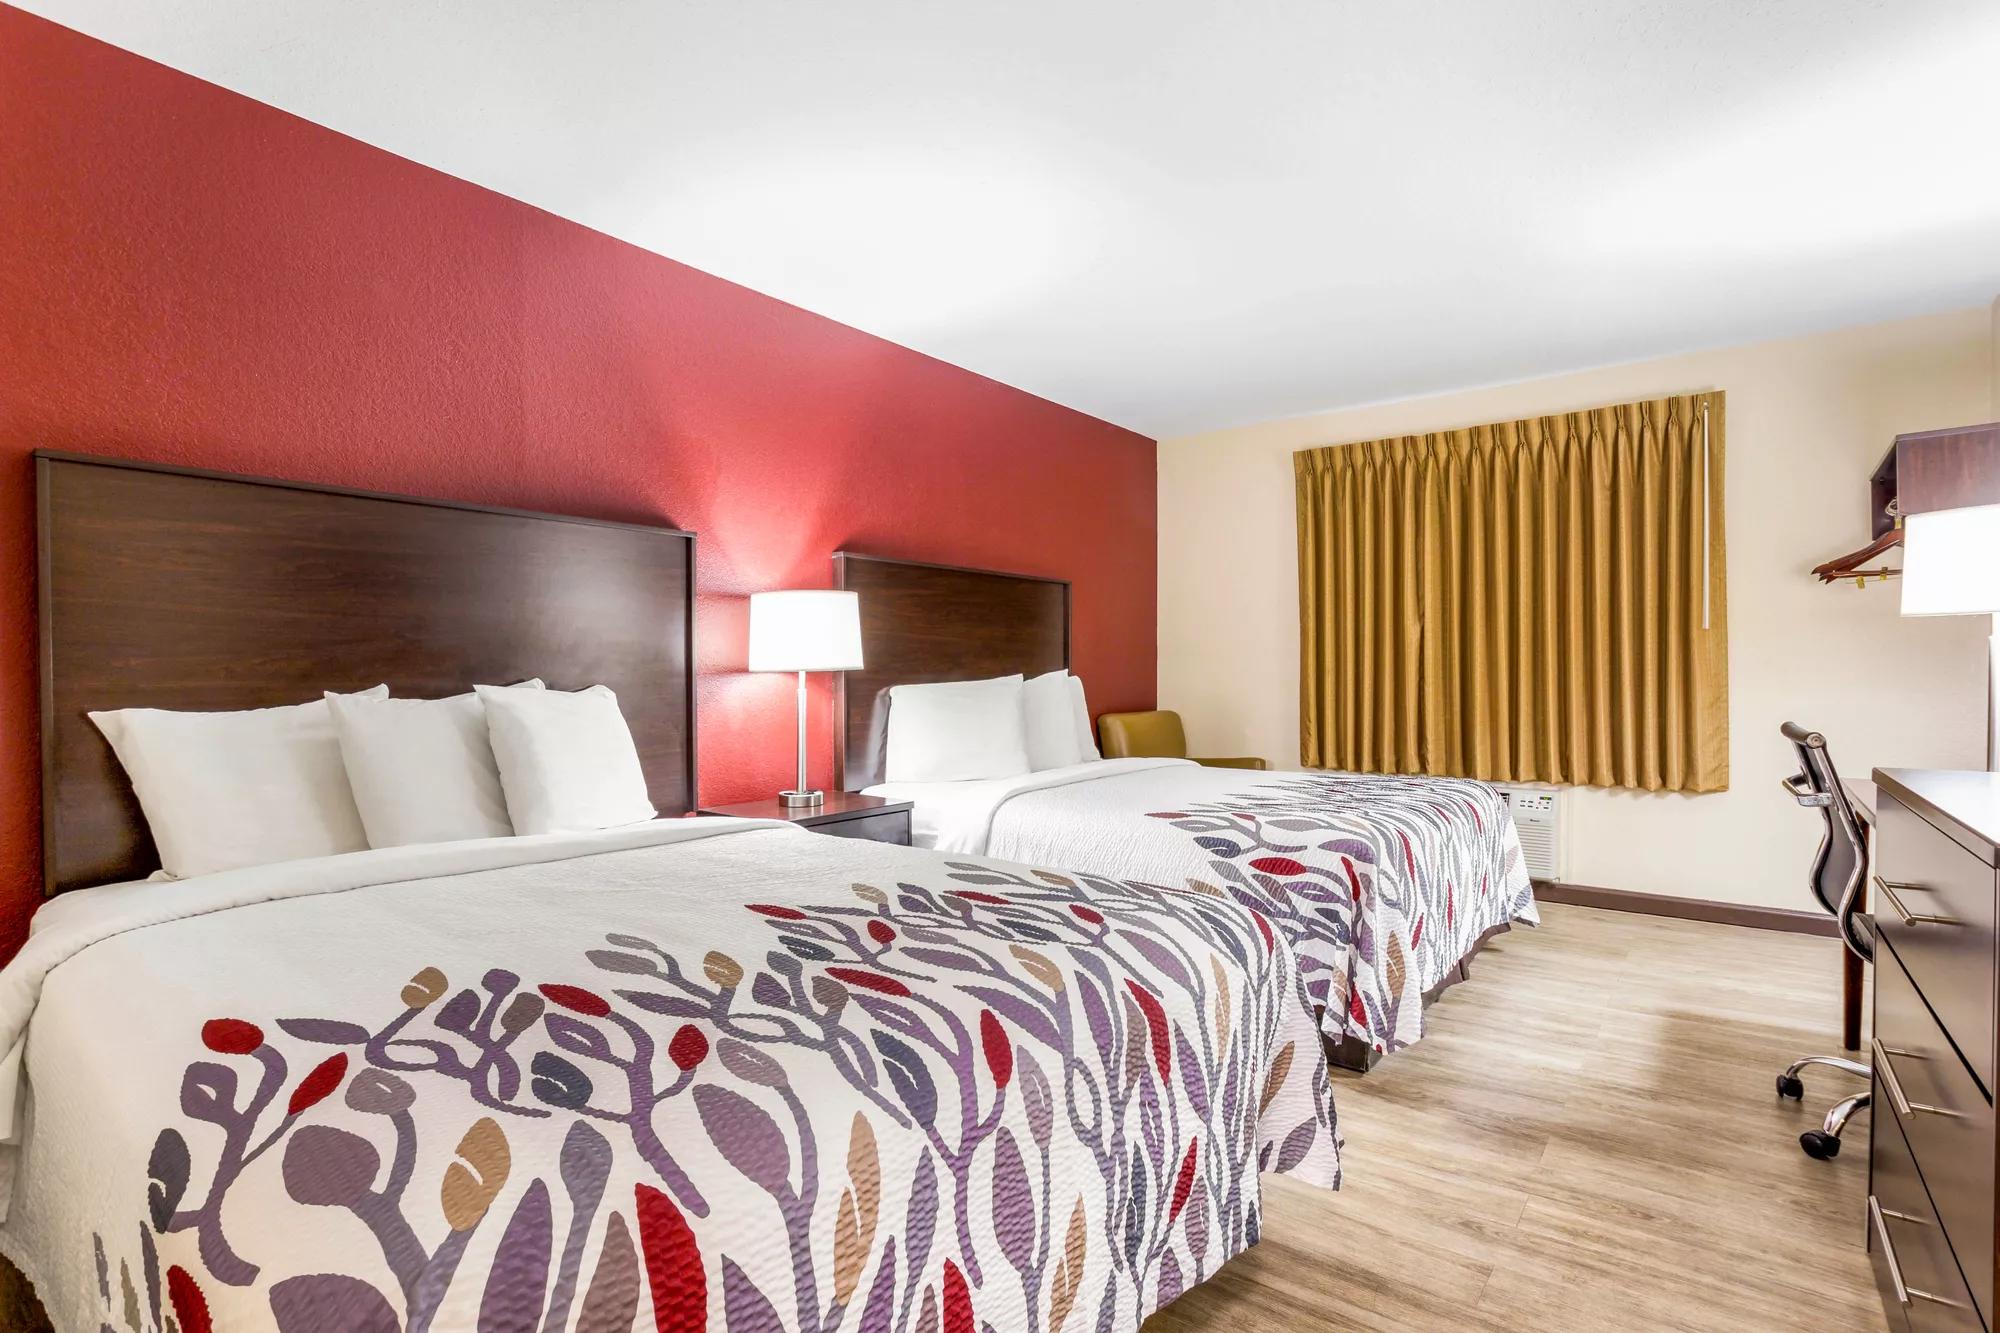 Red Roof Inn Dry Ridge Double Bed Room Image Details